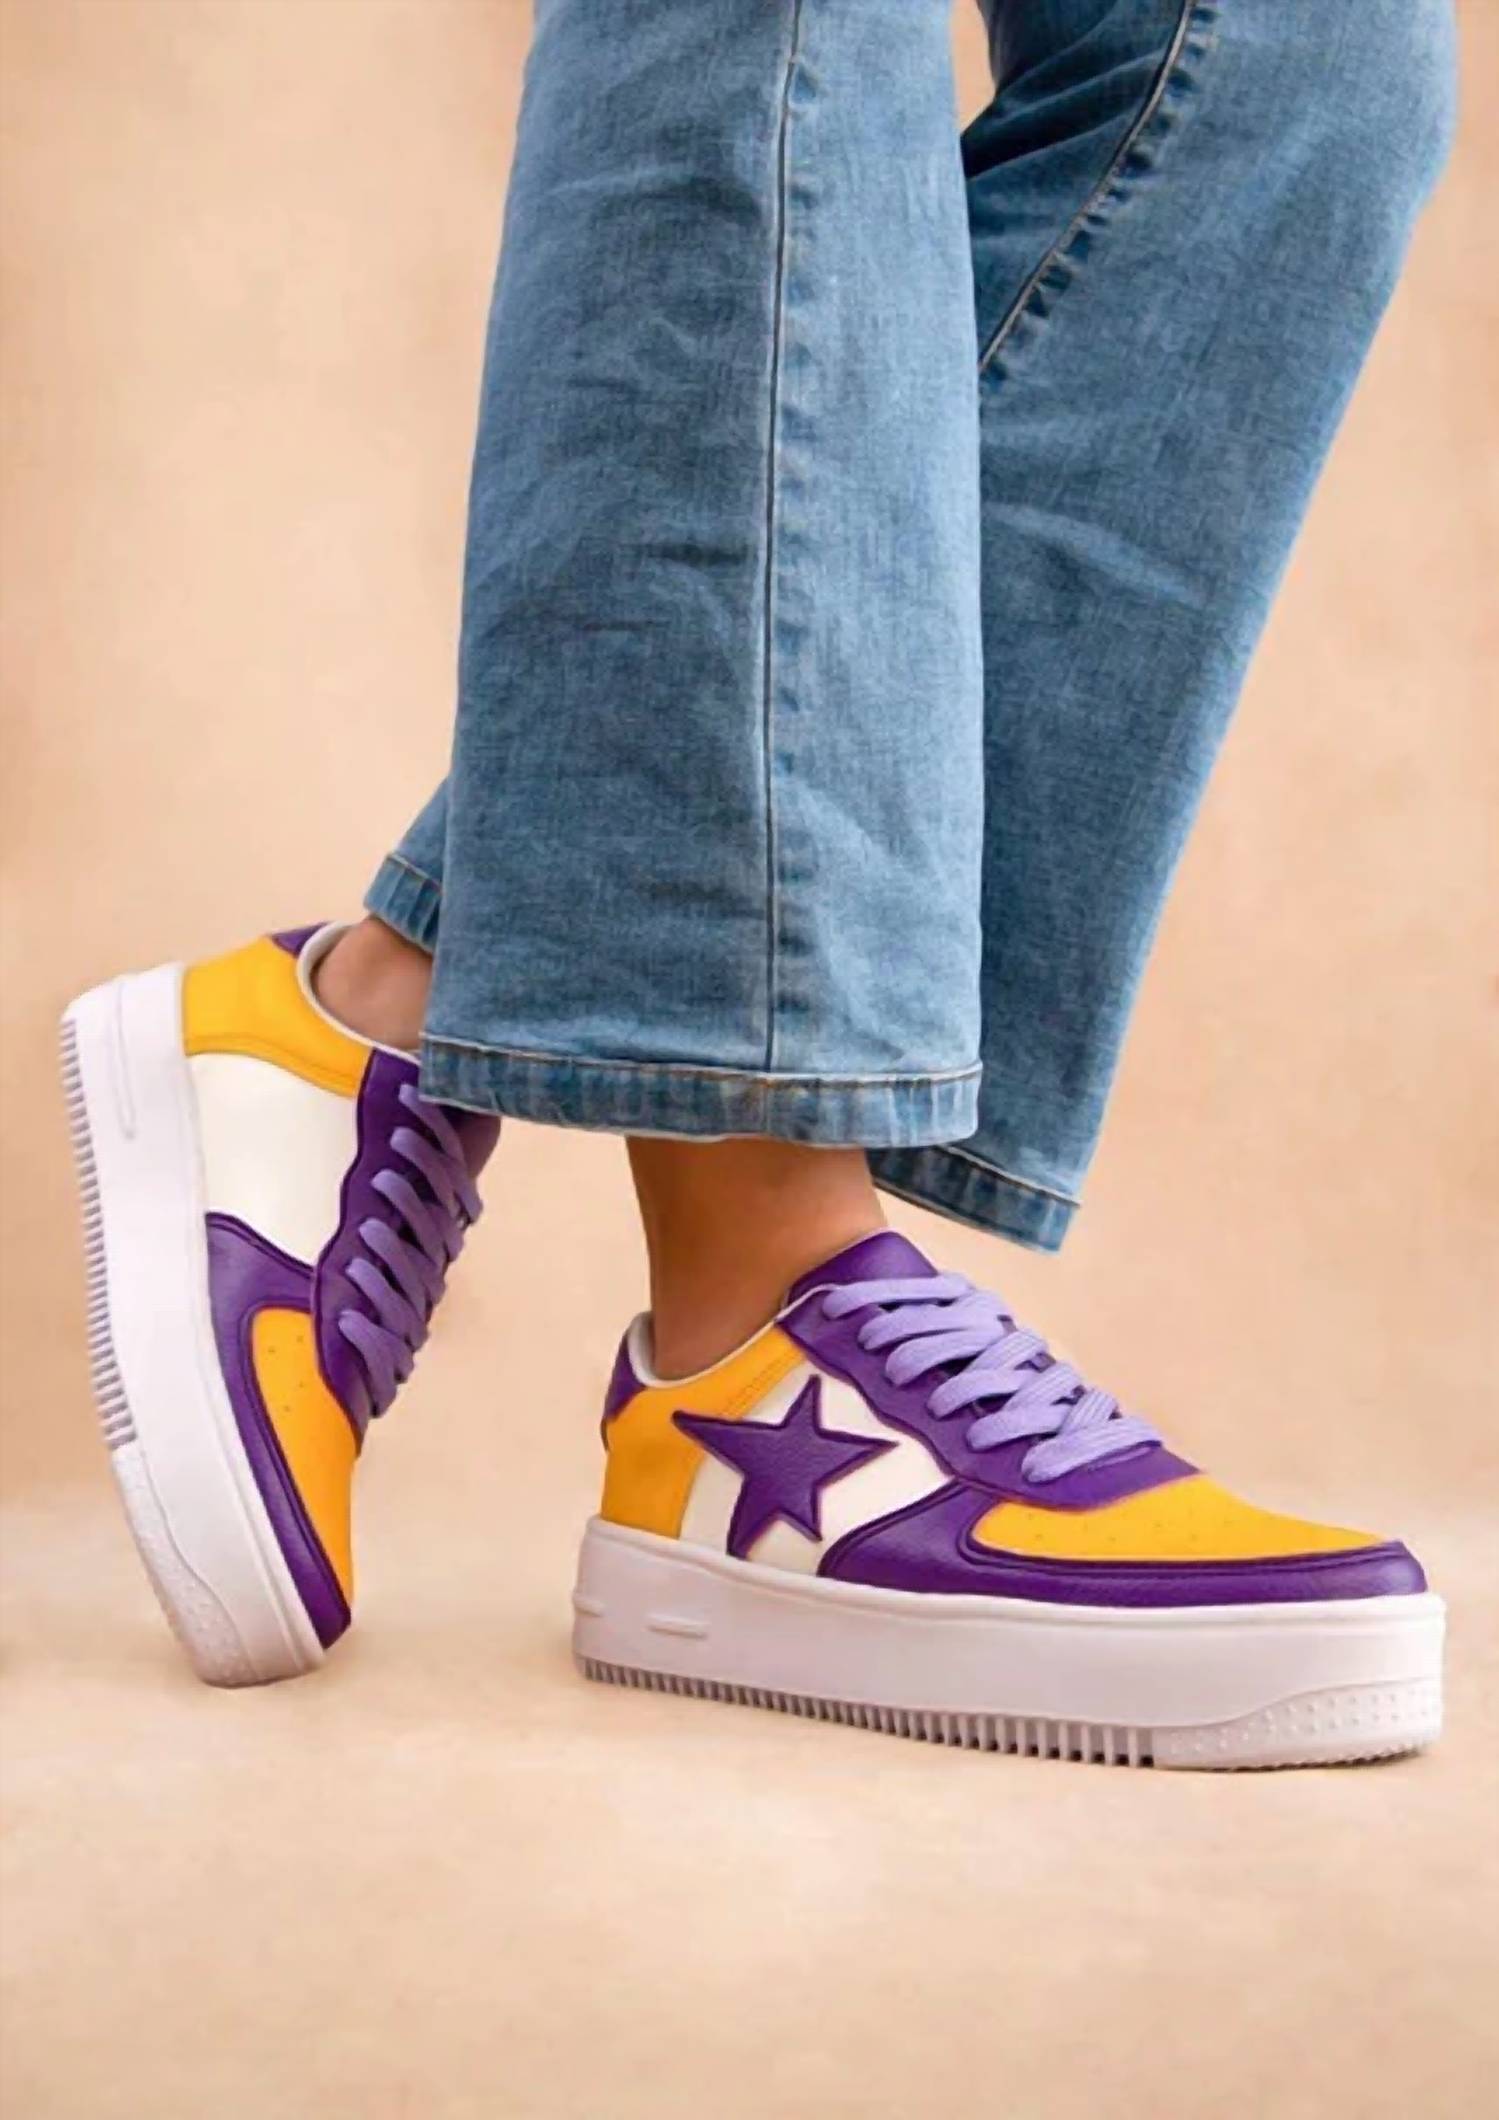 Shop Maker's Purple Game Day Sneakers